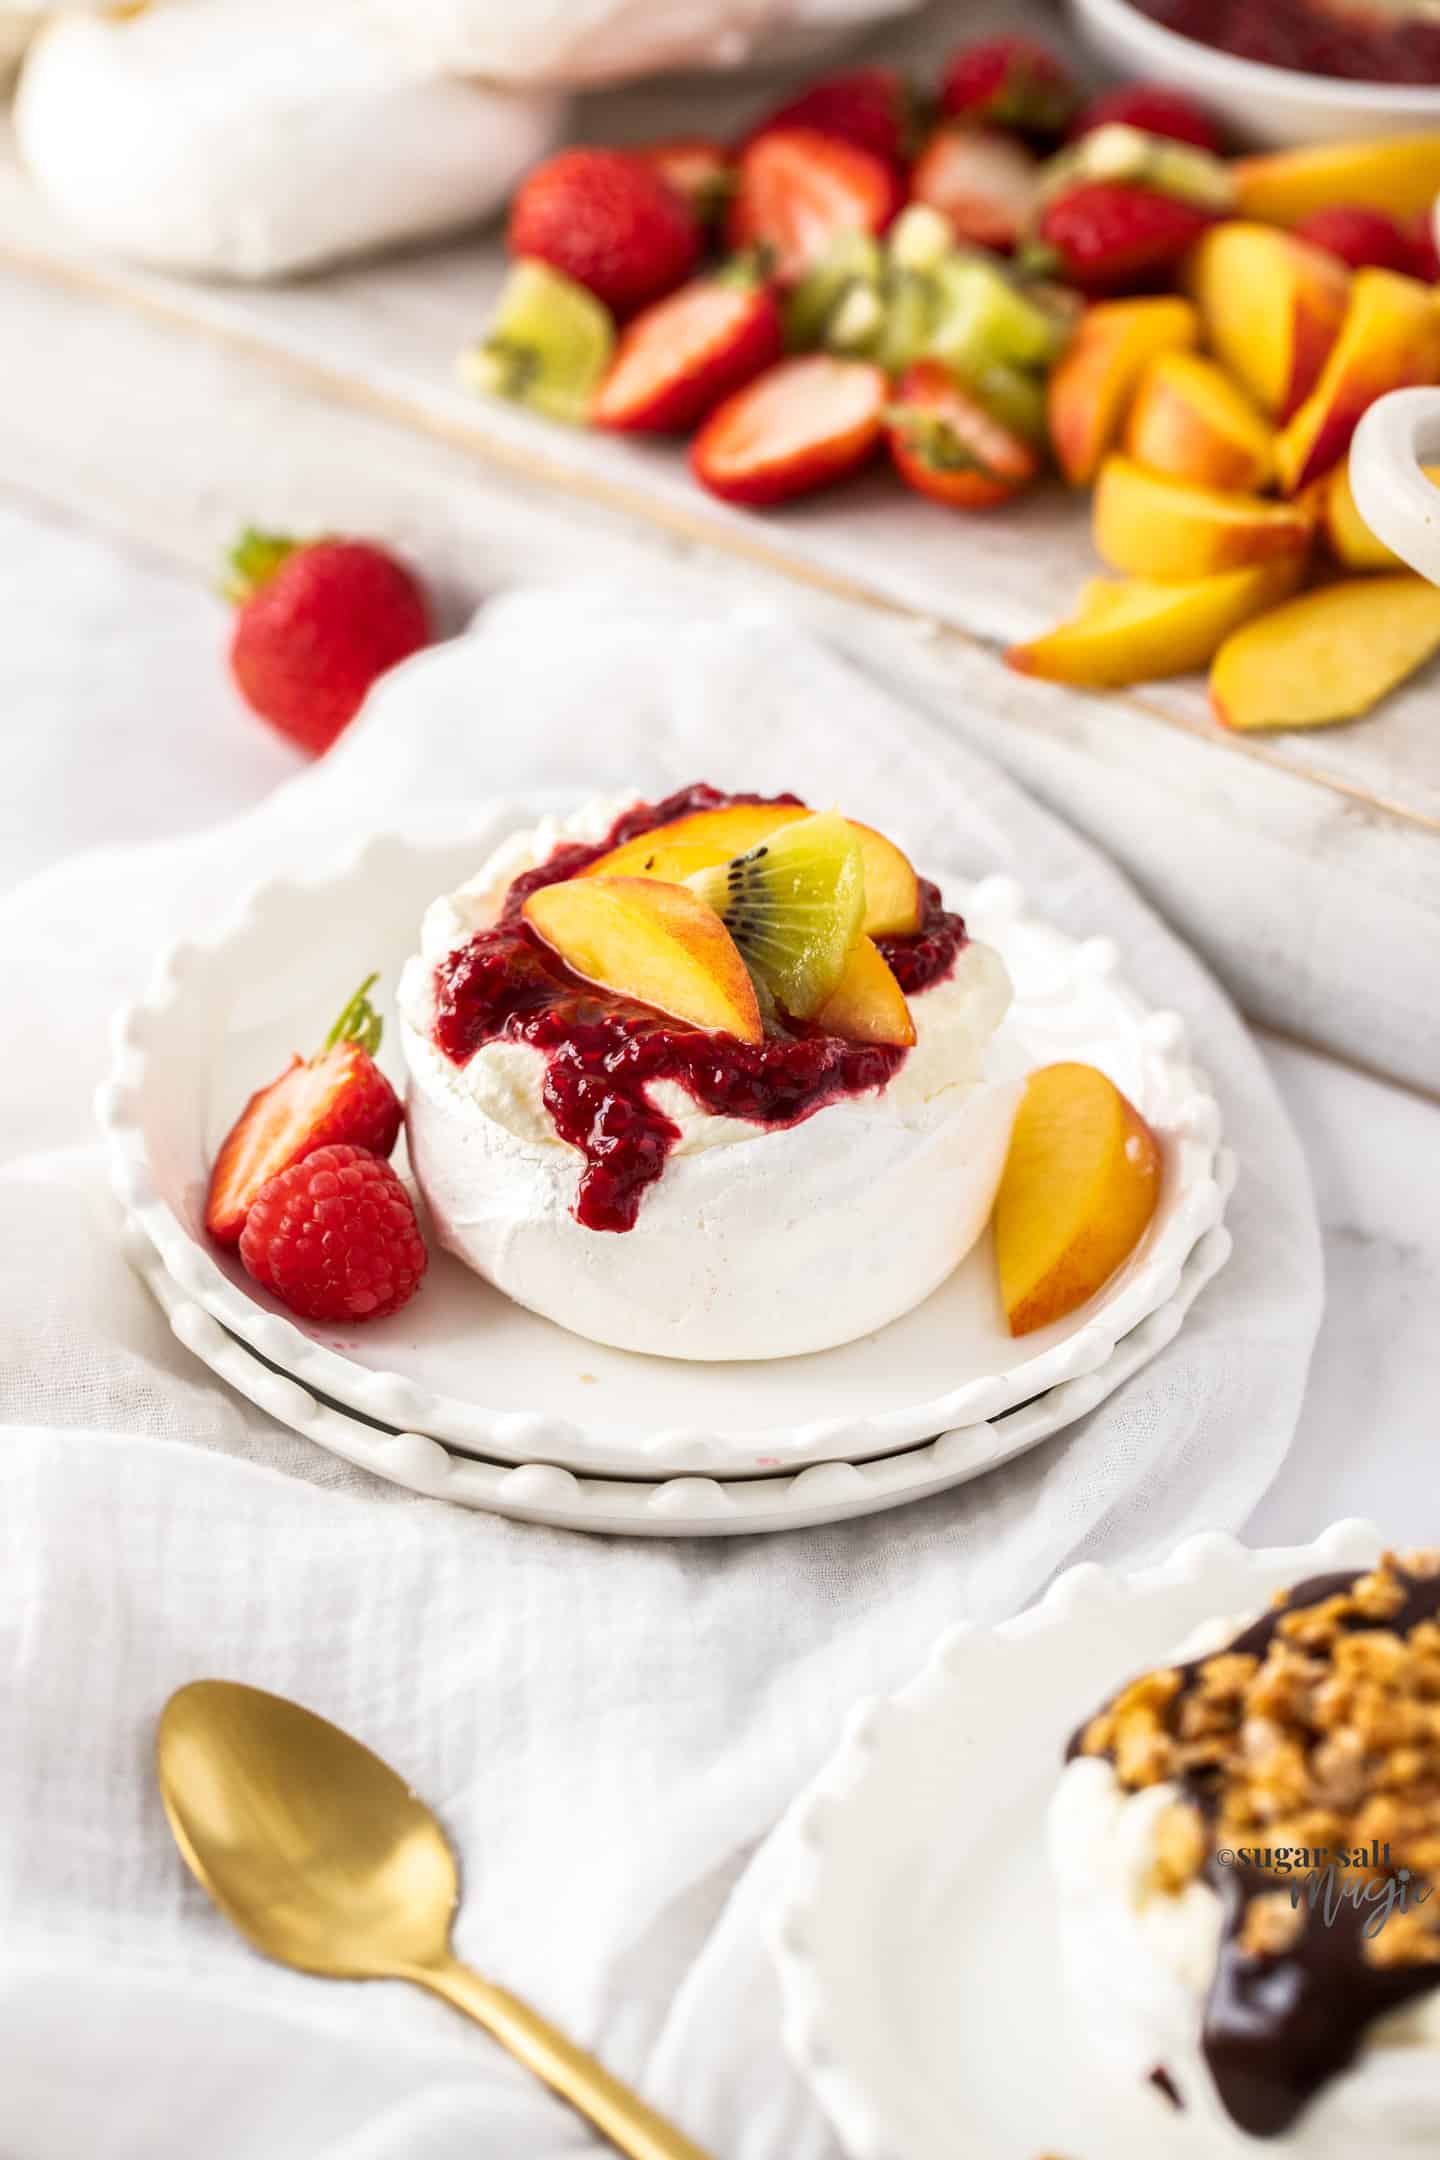 A mini pavlova topped with fruit on a small dessert plate.